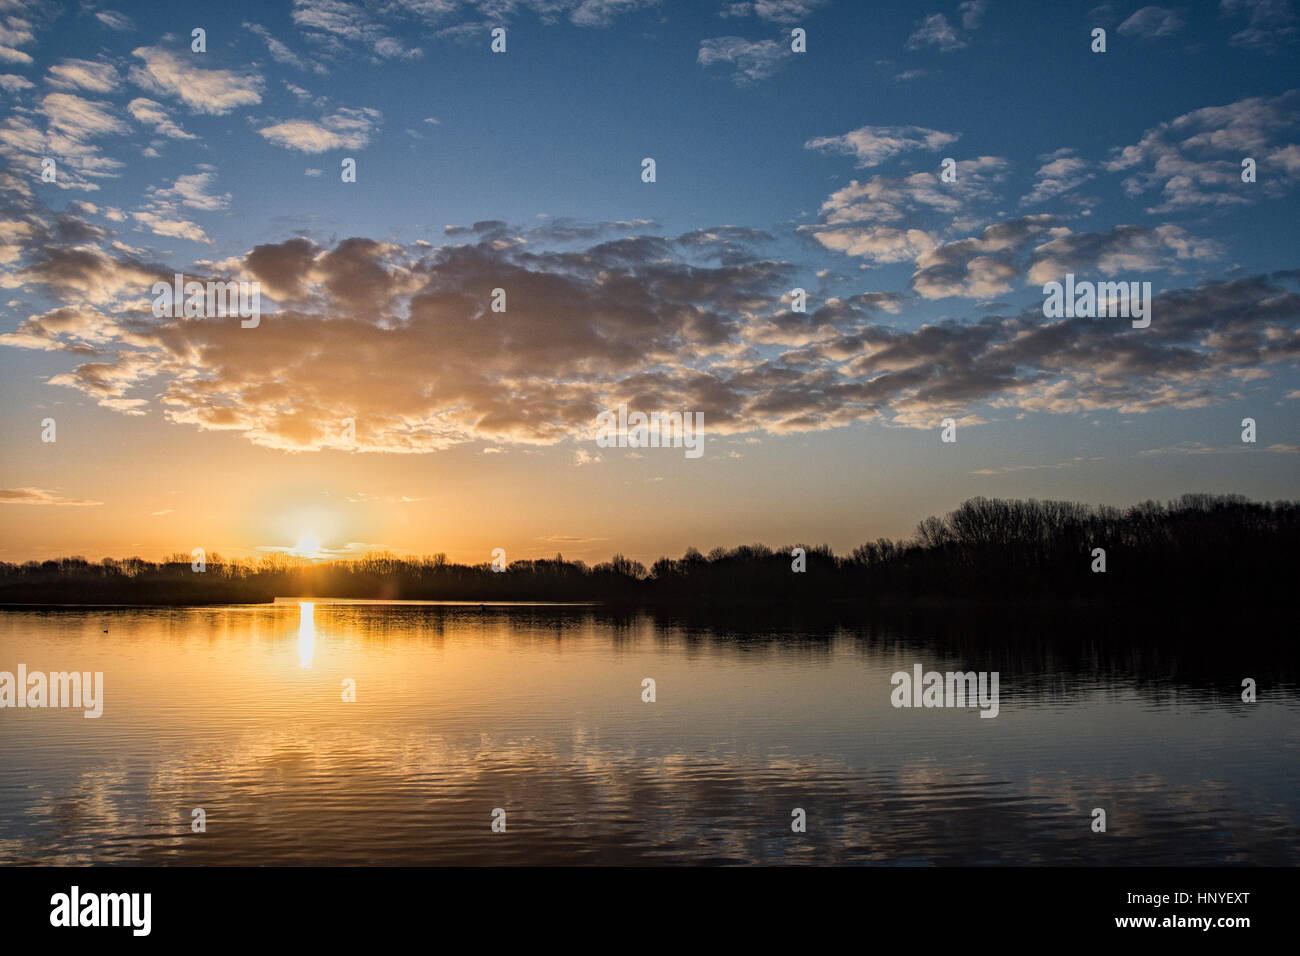 Priory Country Park, Bedford, England Stock Photo - Alamy